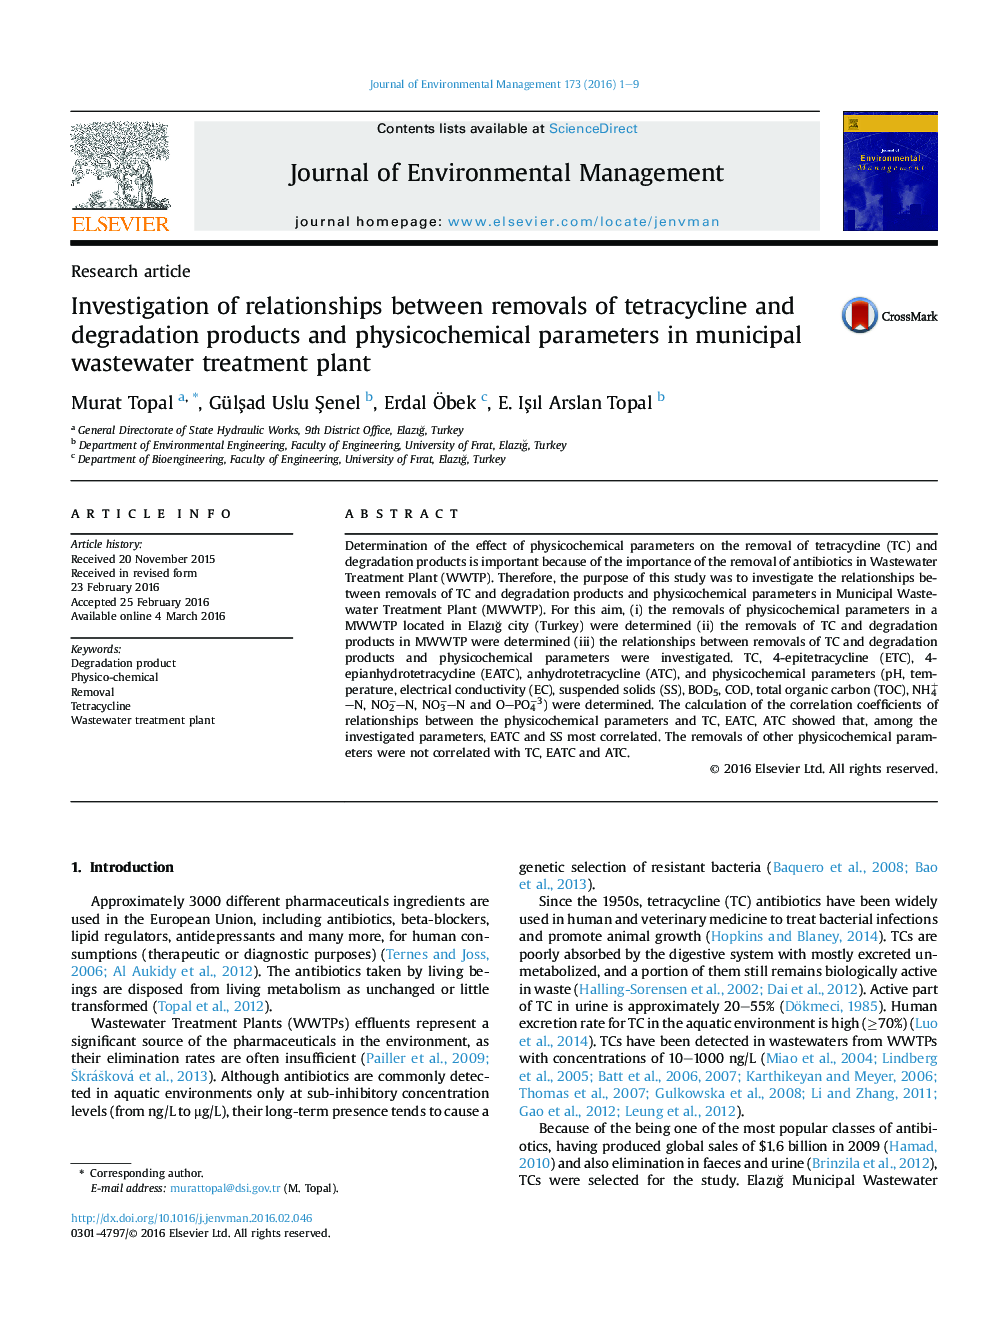 Investigation of relationships between removals of tetracycline and degradation products and physicochemical parameters in municipal wastewater treatment plant